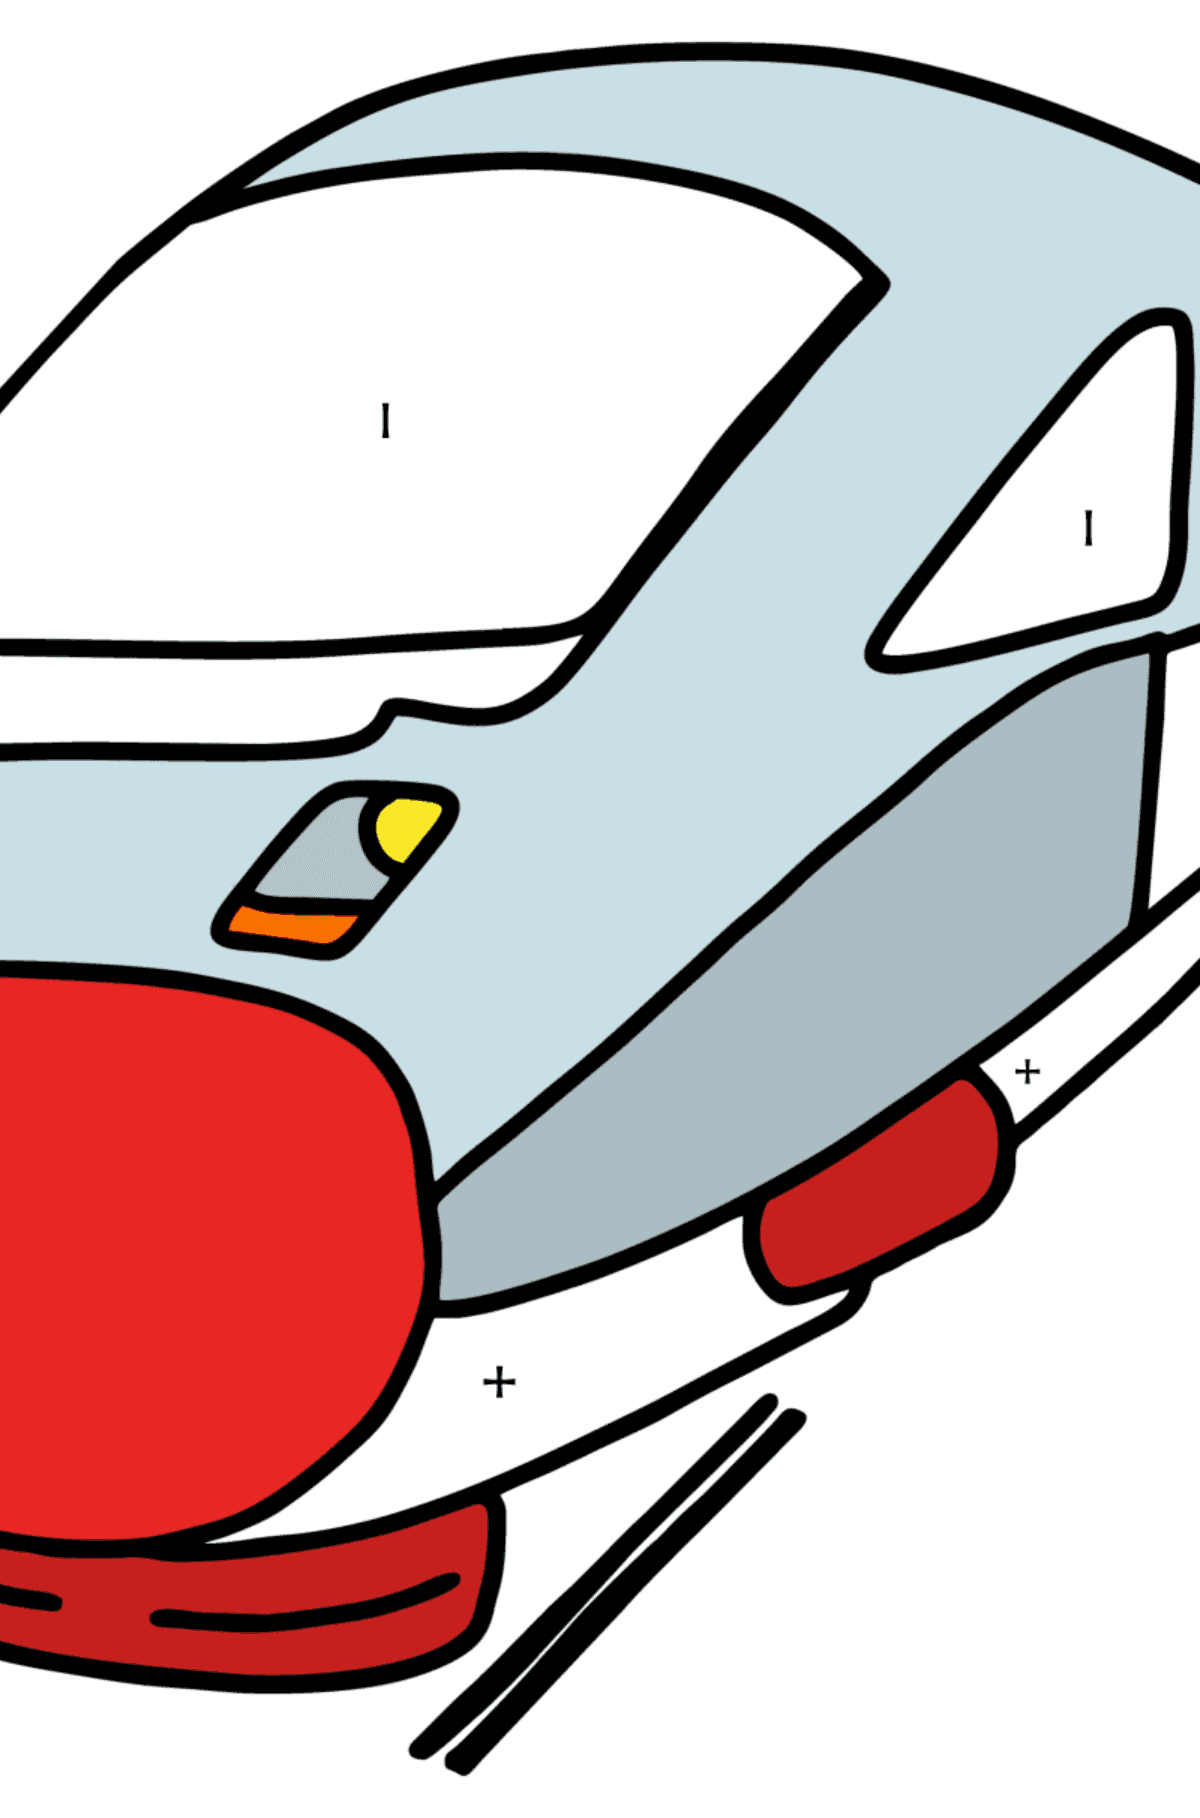 Train coloring page - Coloring by Symbols for Kids